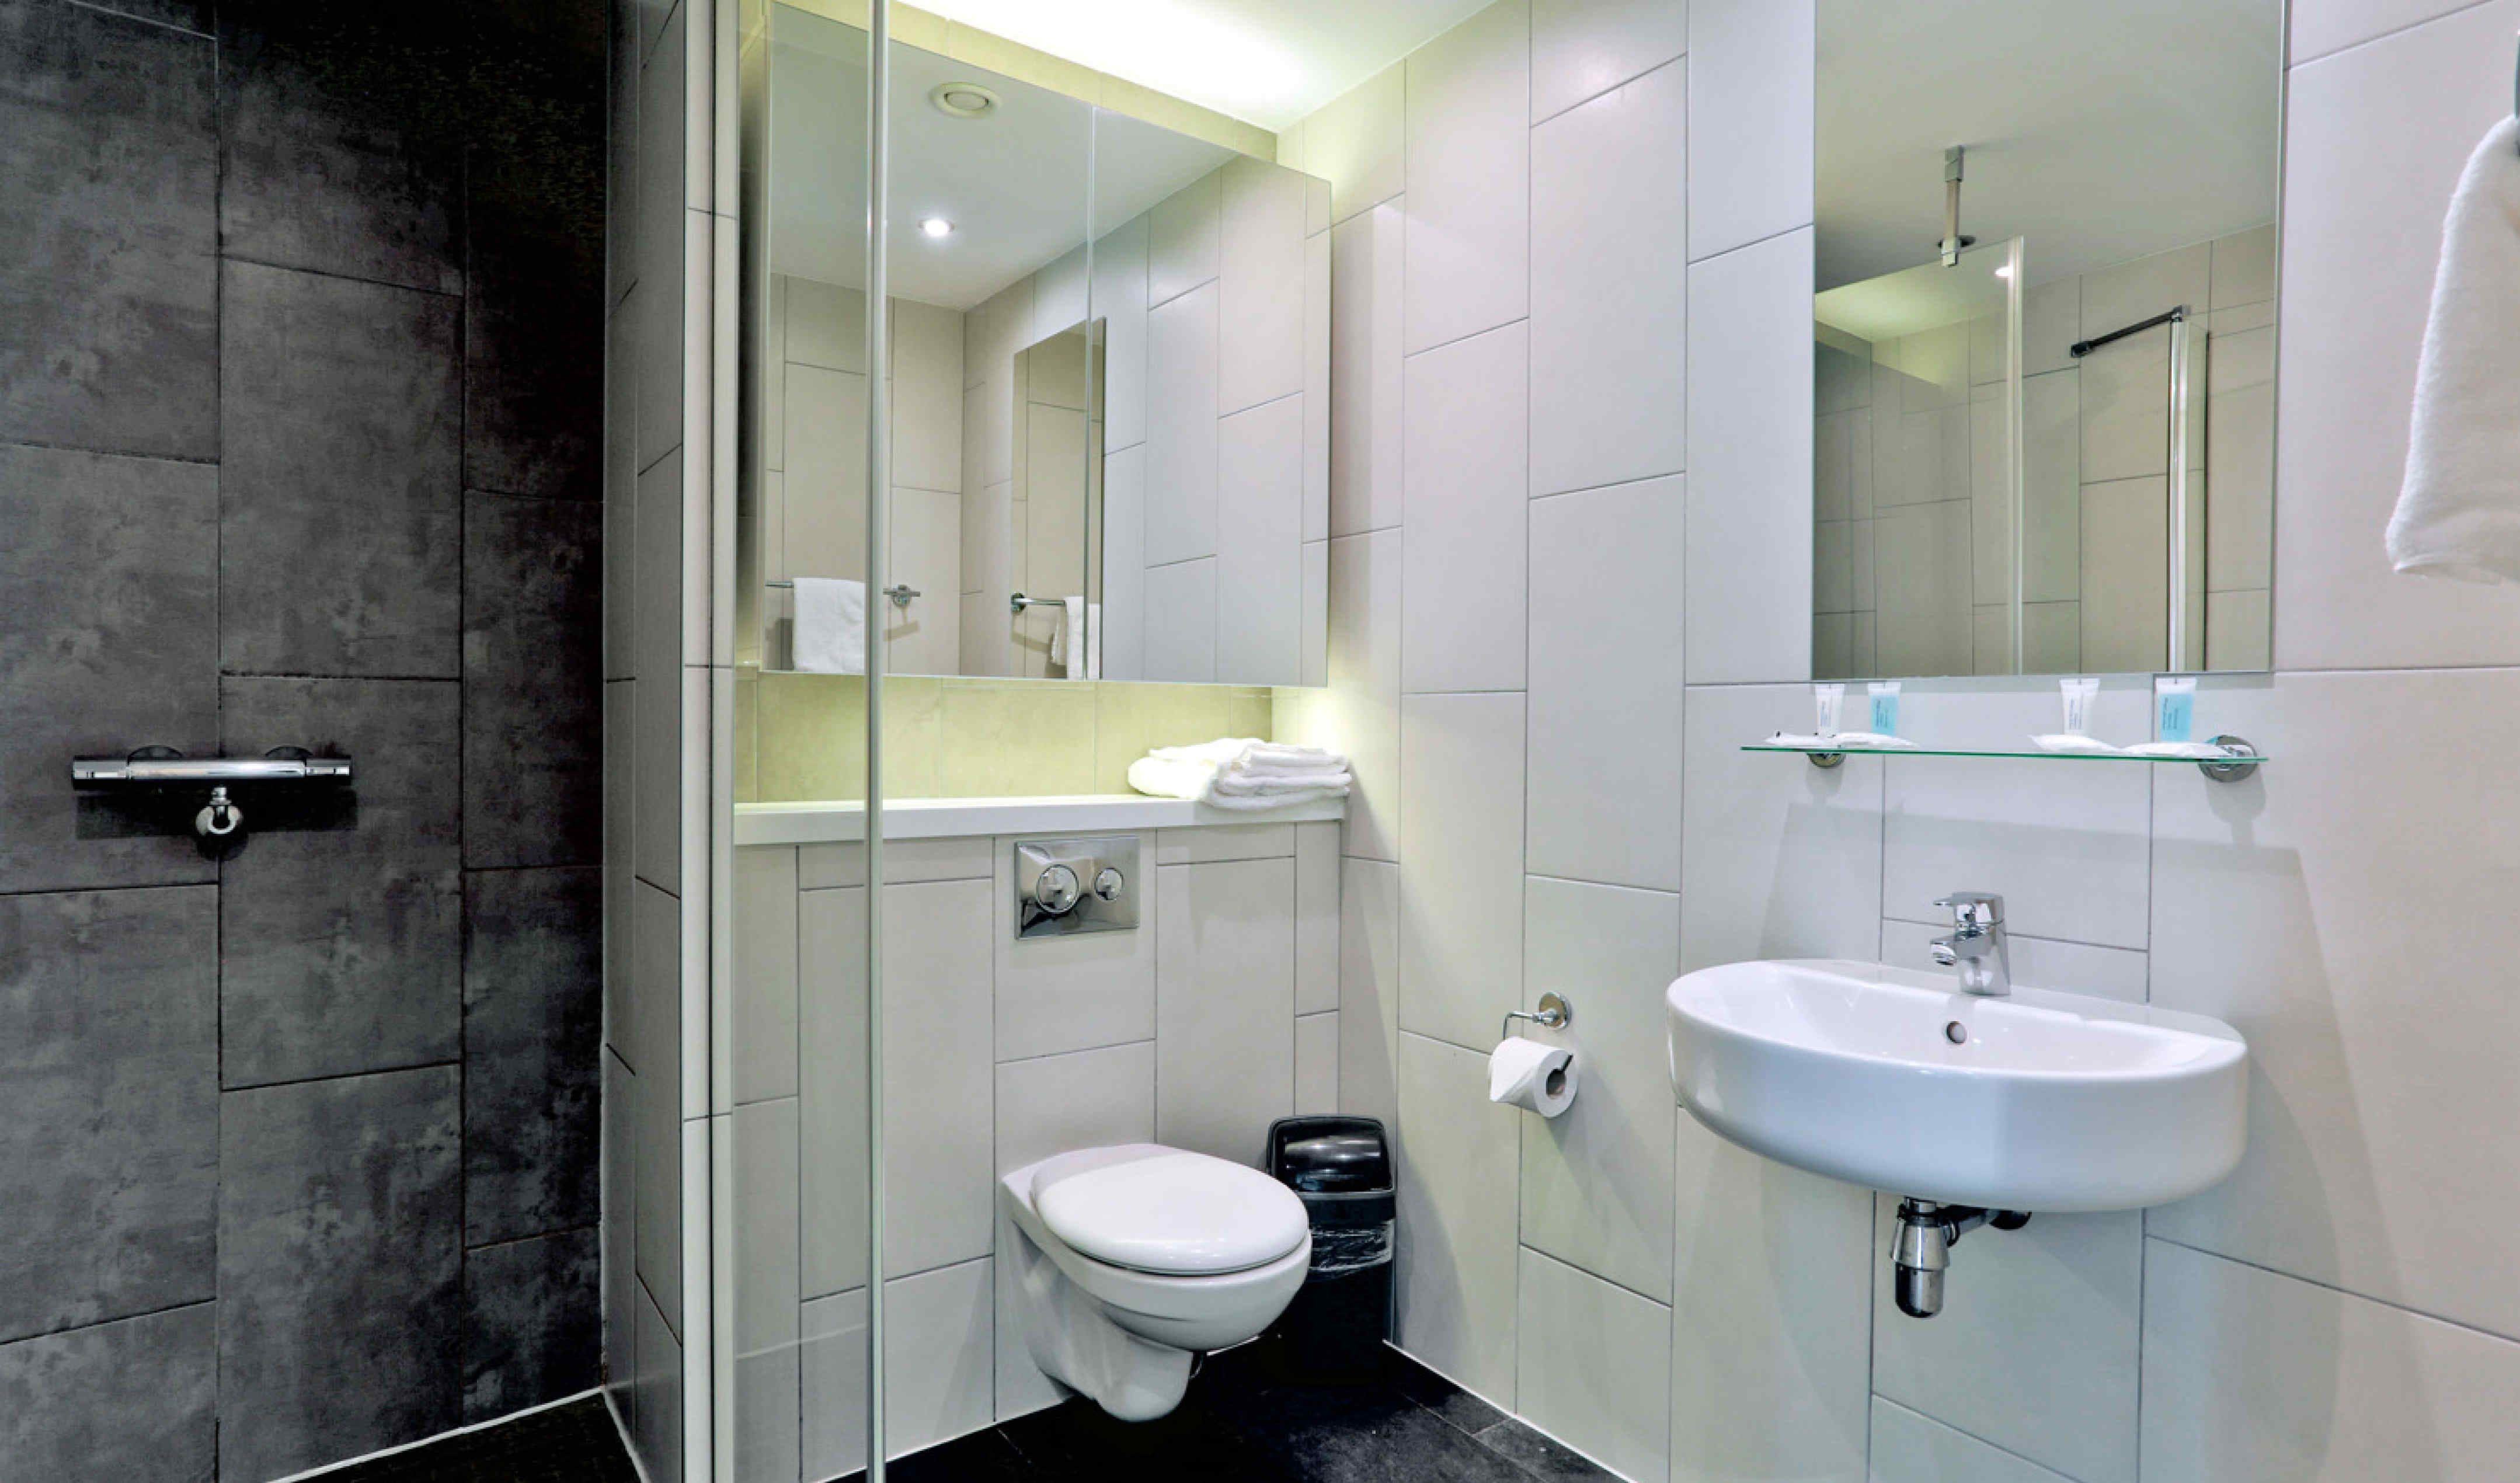 Woodward rooms with ensuite in West London